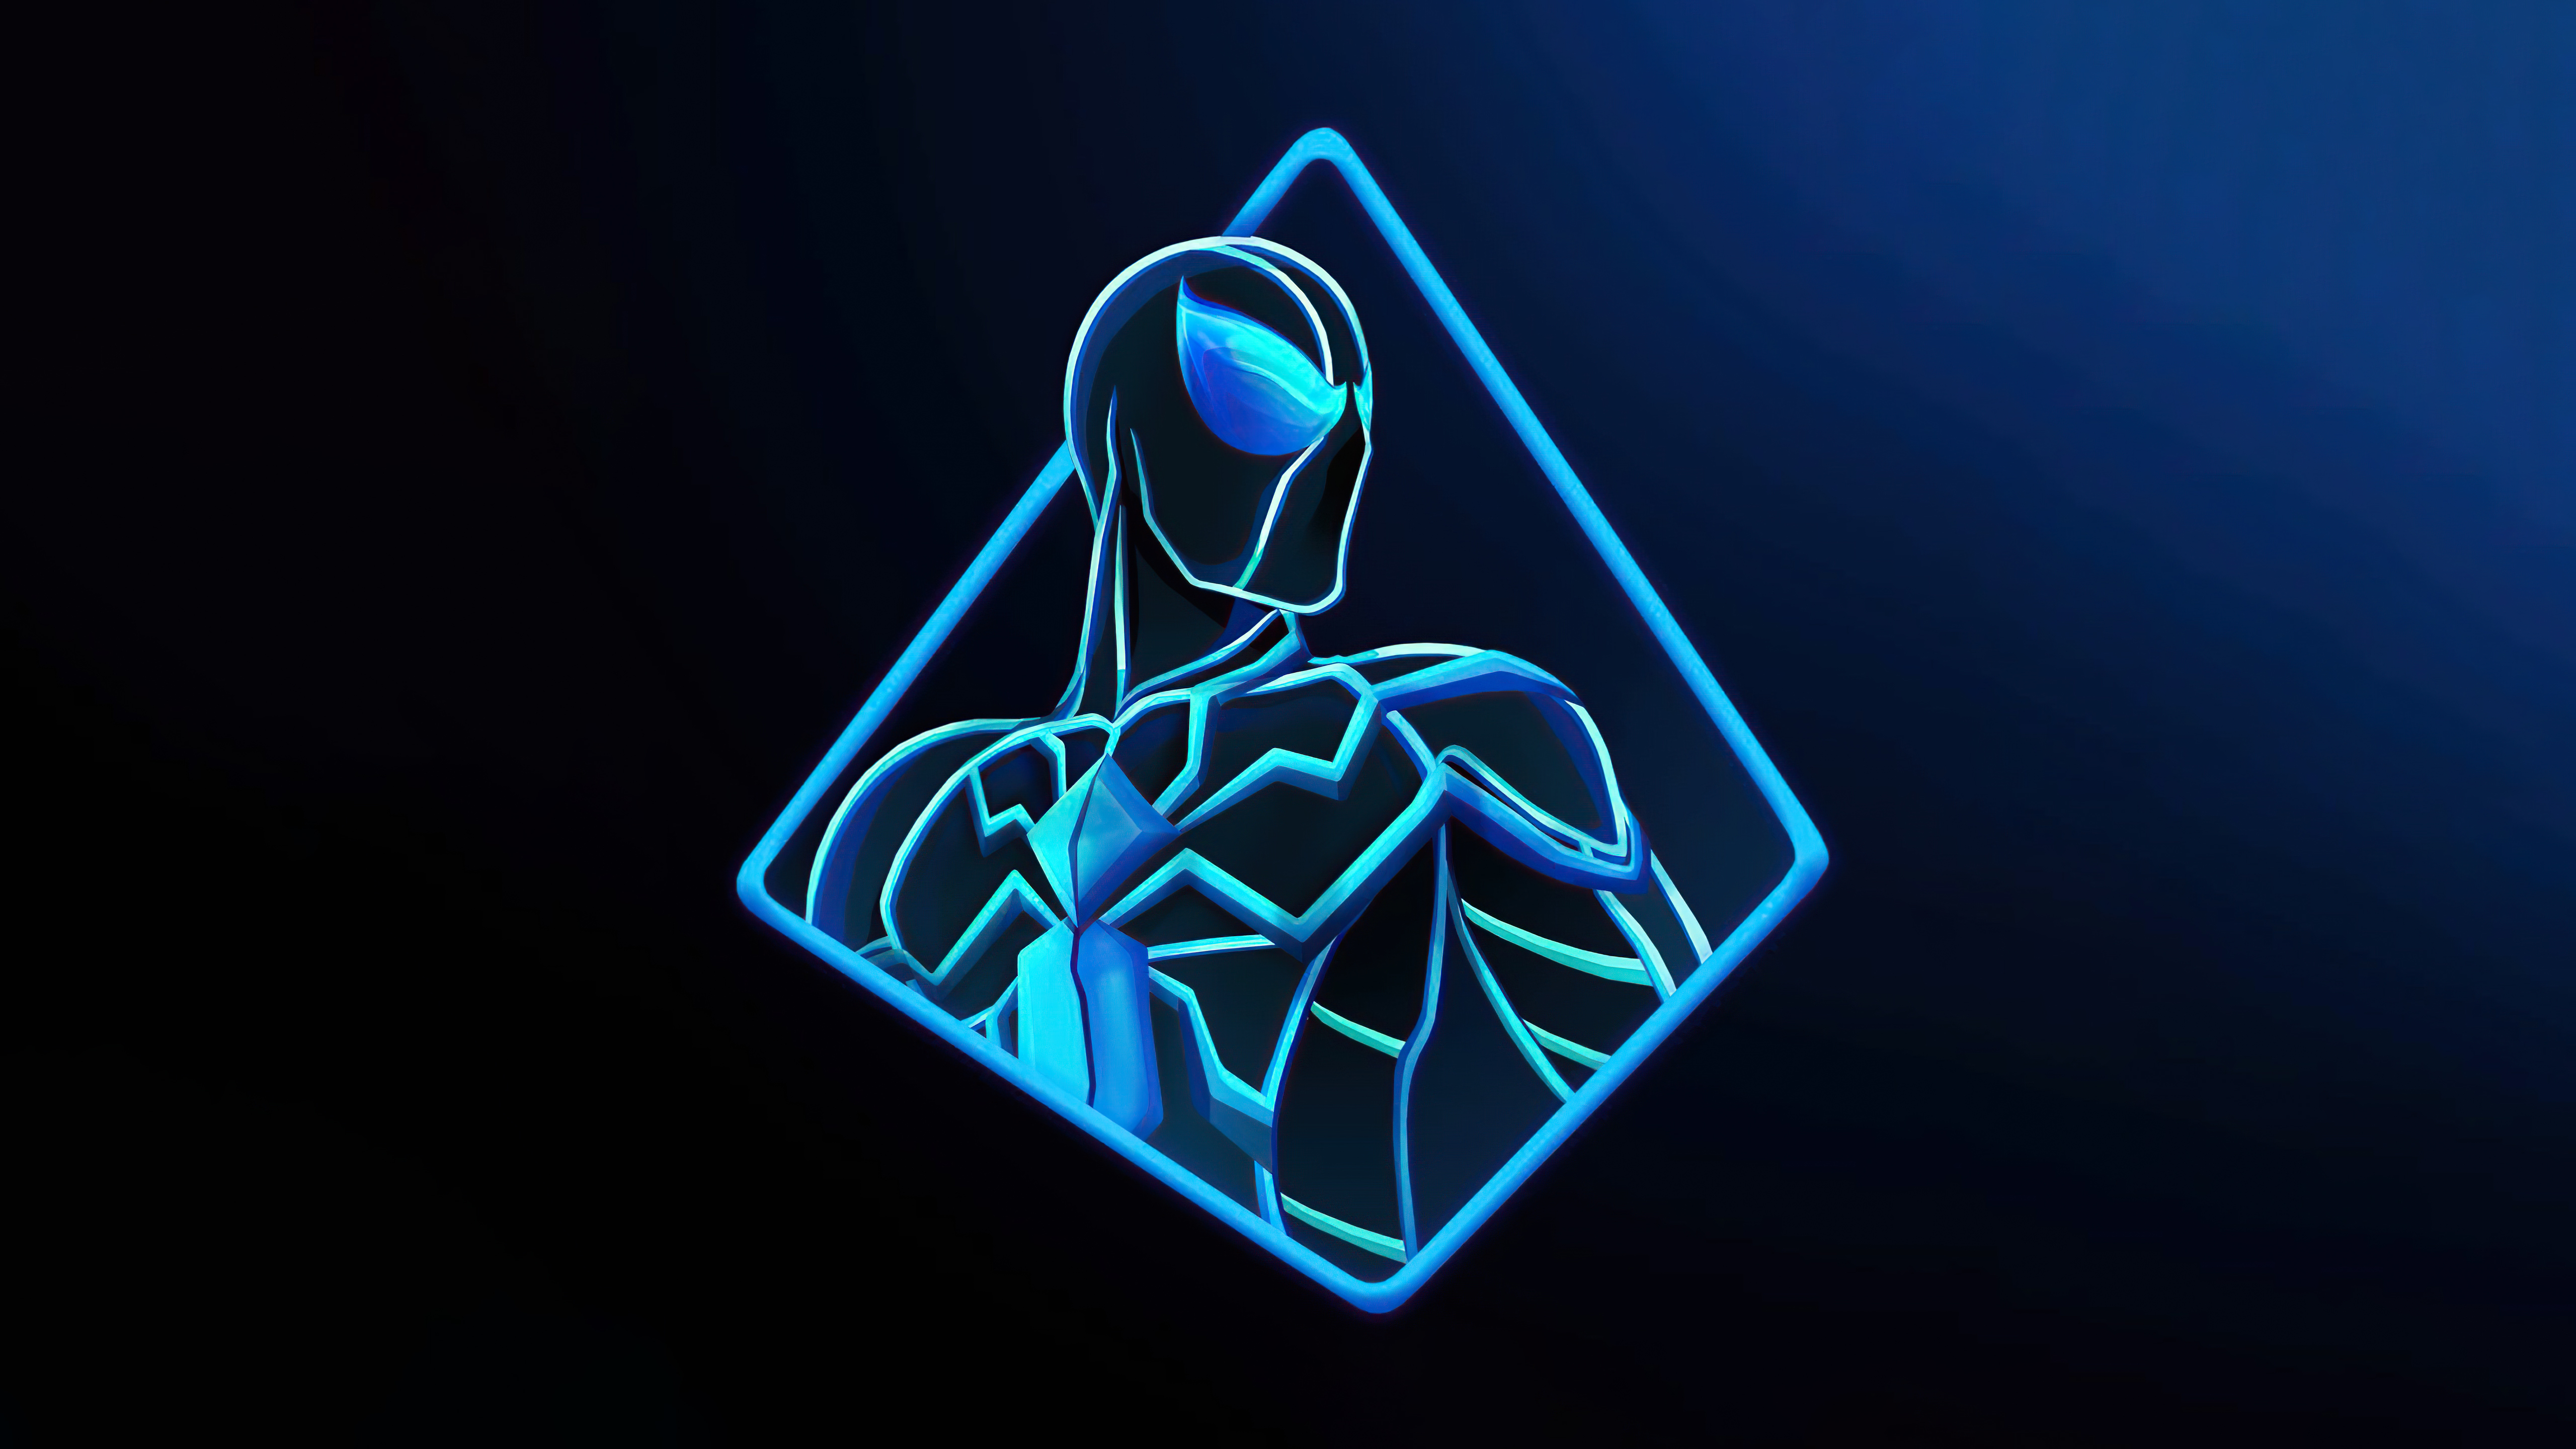 1080x224020 Spider Man Glowing Minimal Art 1080x224020 Resolution Wallpaper,  HD Minimalist 4K Wallpapers, Images, Photos and Background - Wallpapers Den